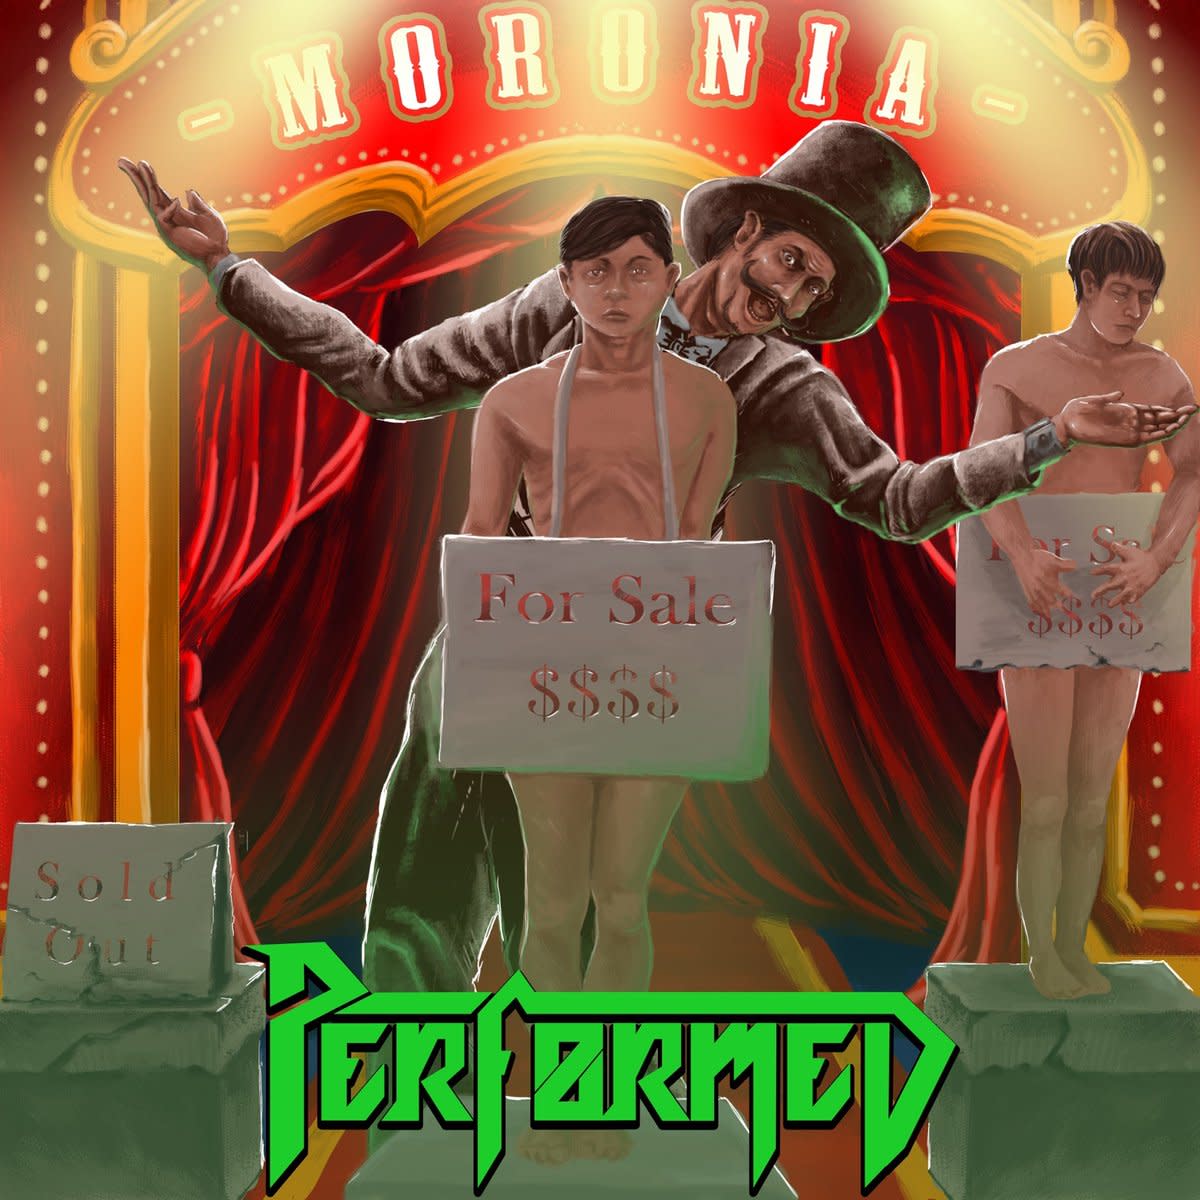 review-of-the-album-moronia-by-performed